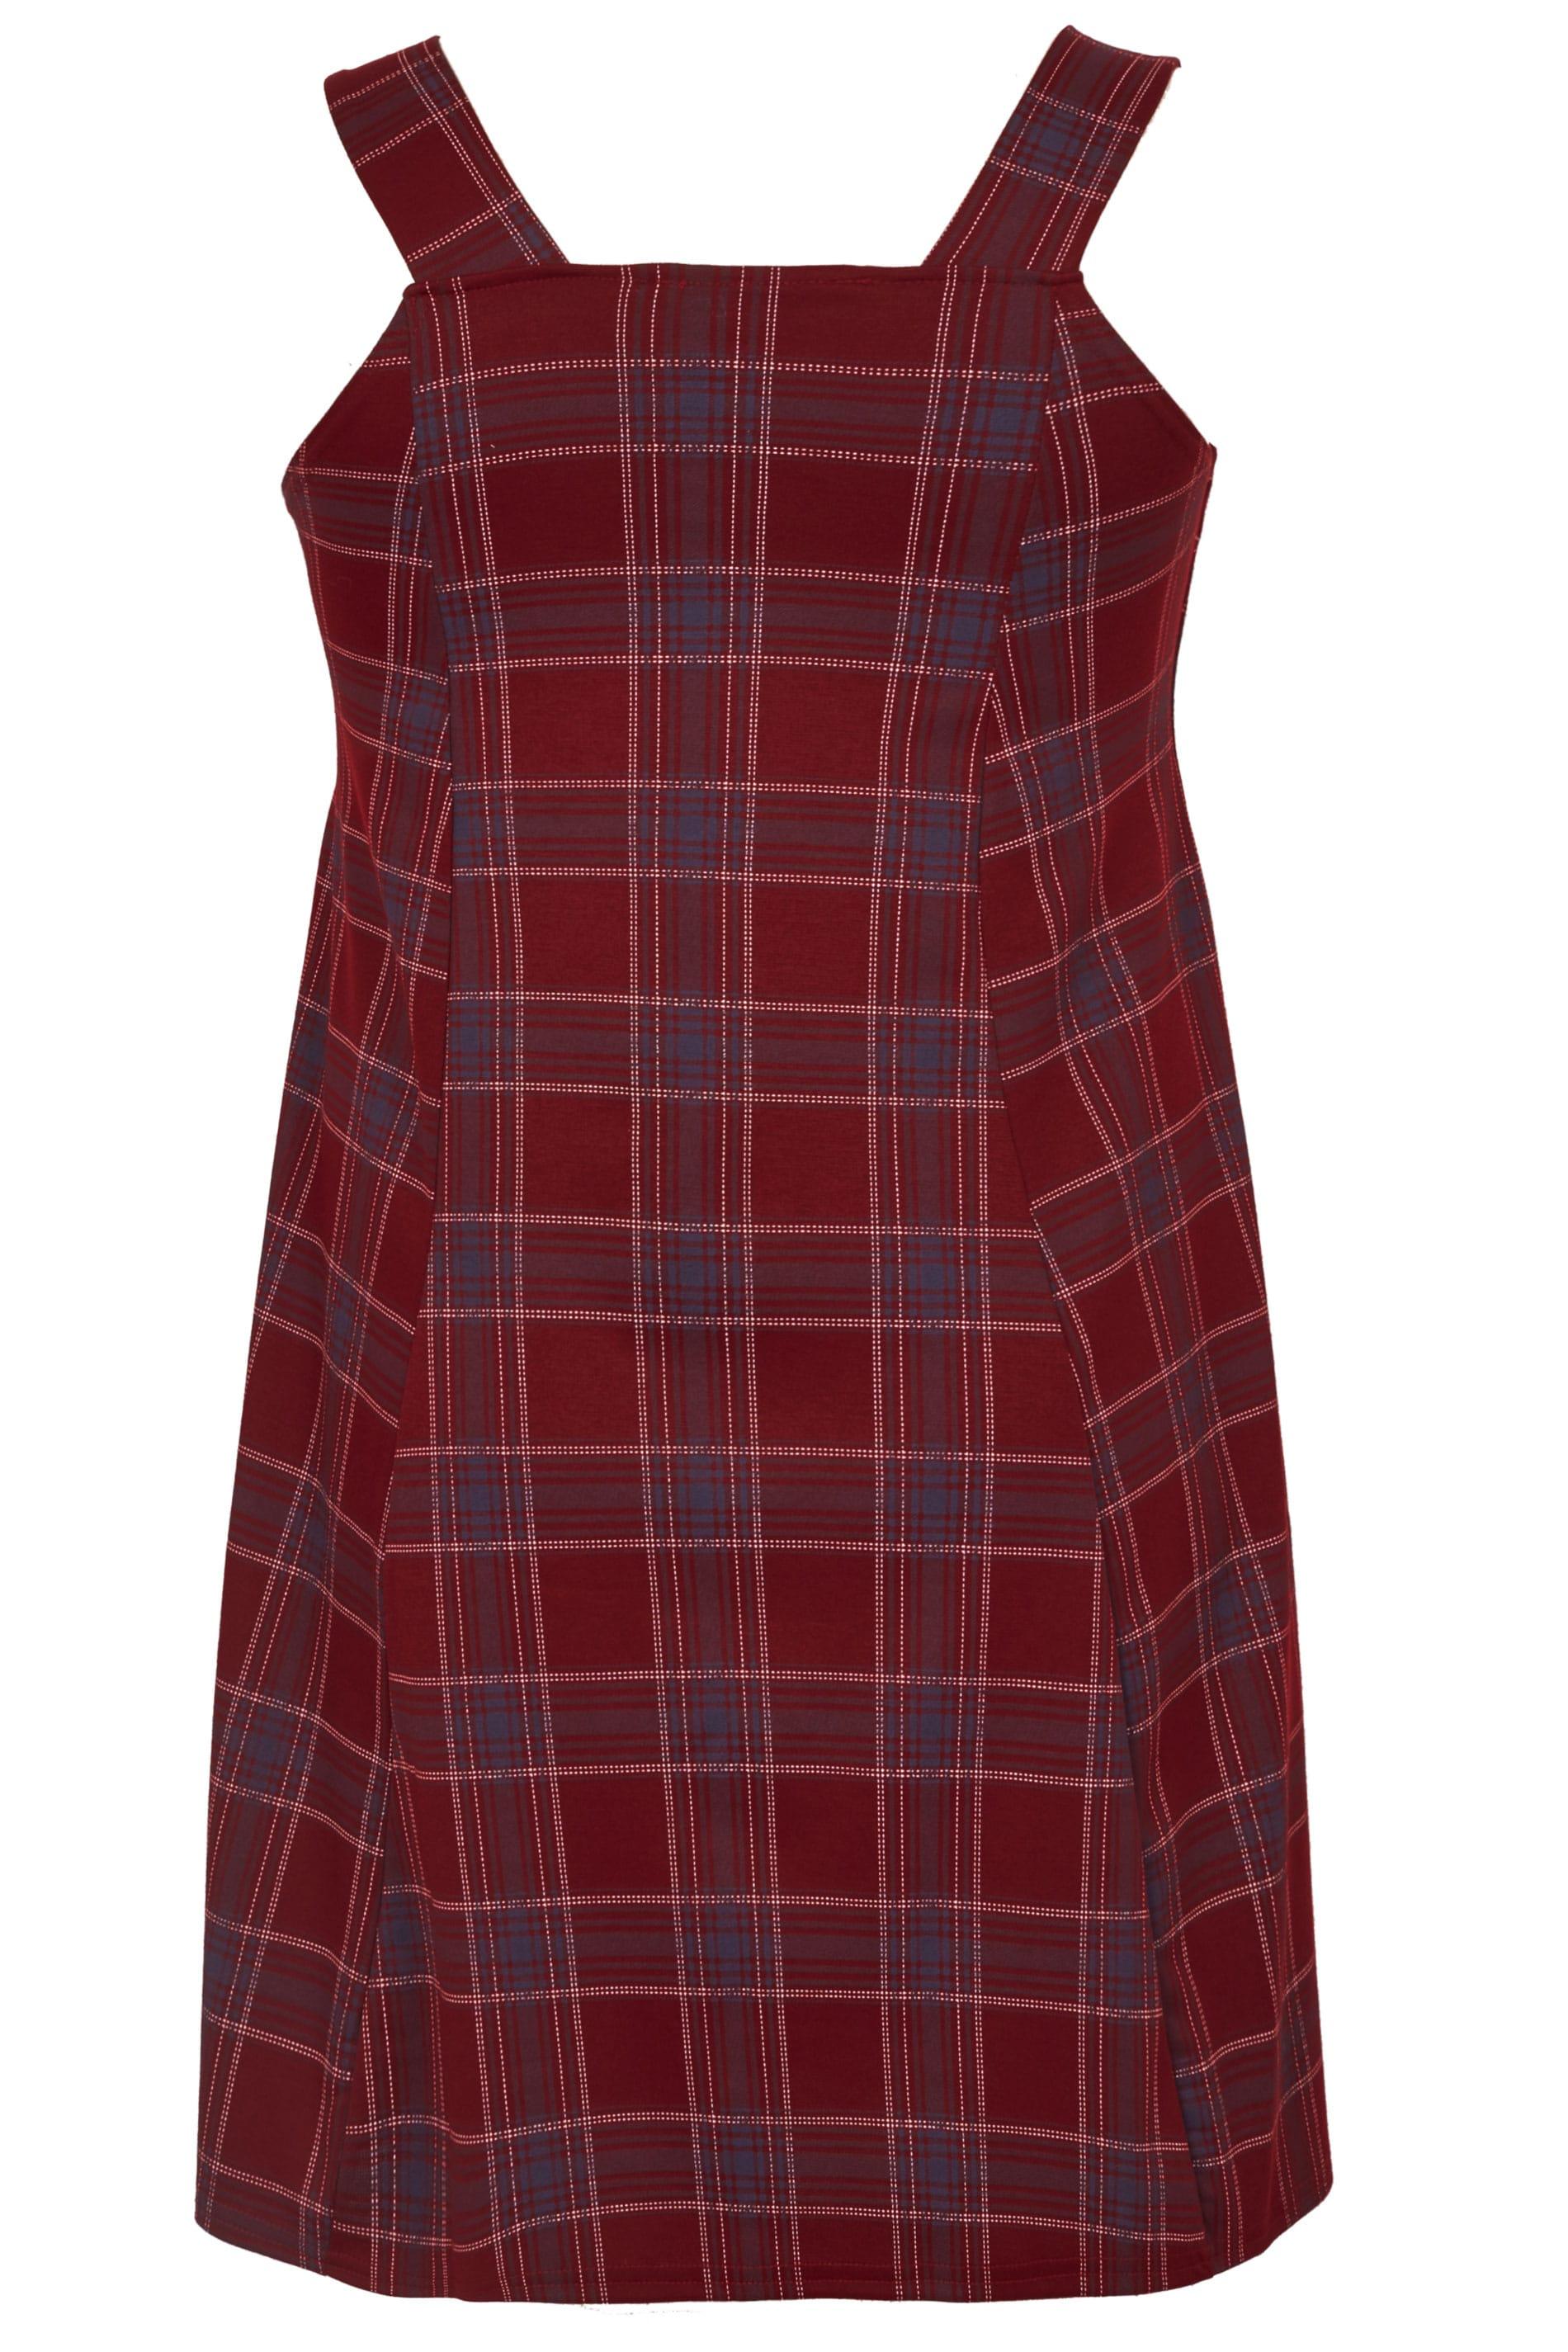 Red Check Clothing Logo - LIMITED COLLECTION Red Check Button Pinafore Dress. Plus size 16 to